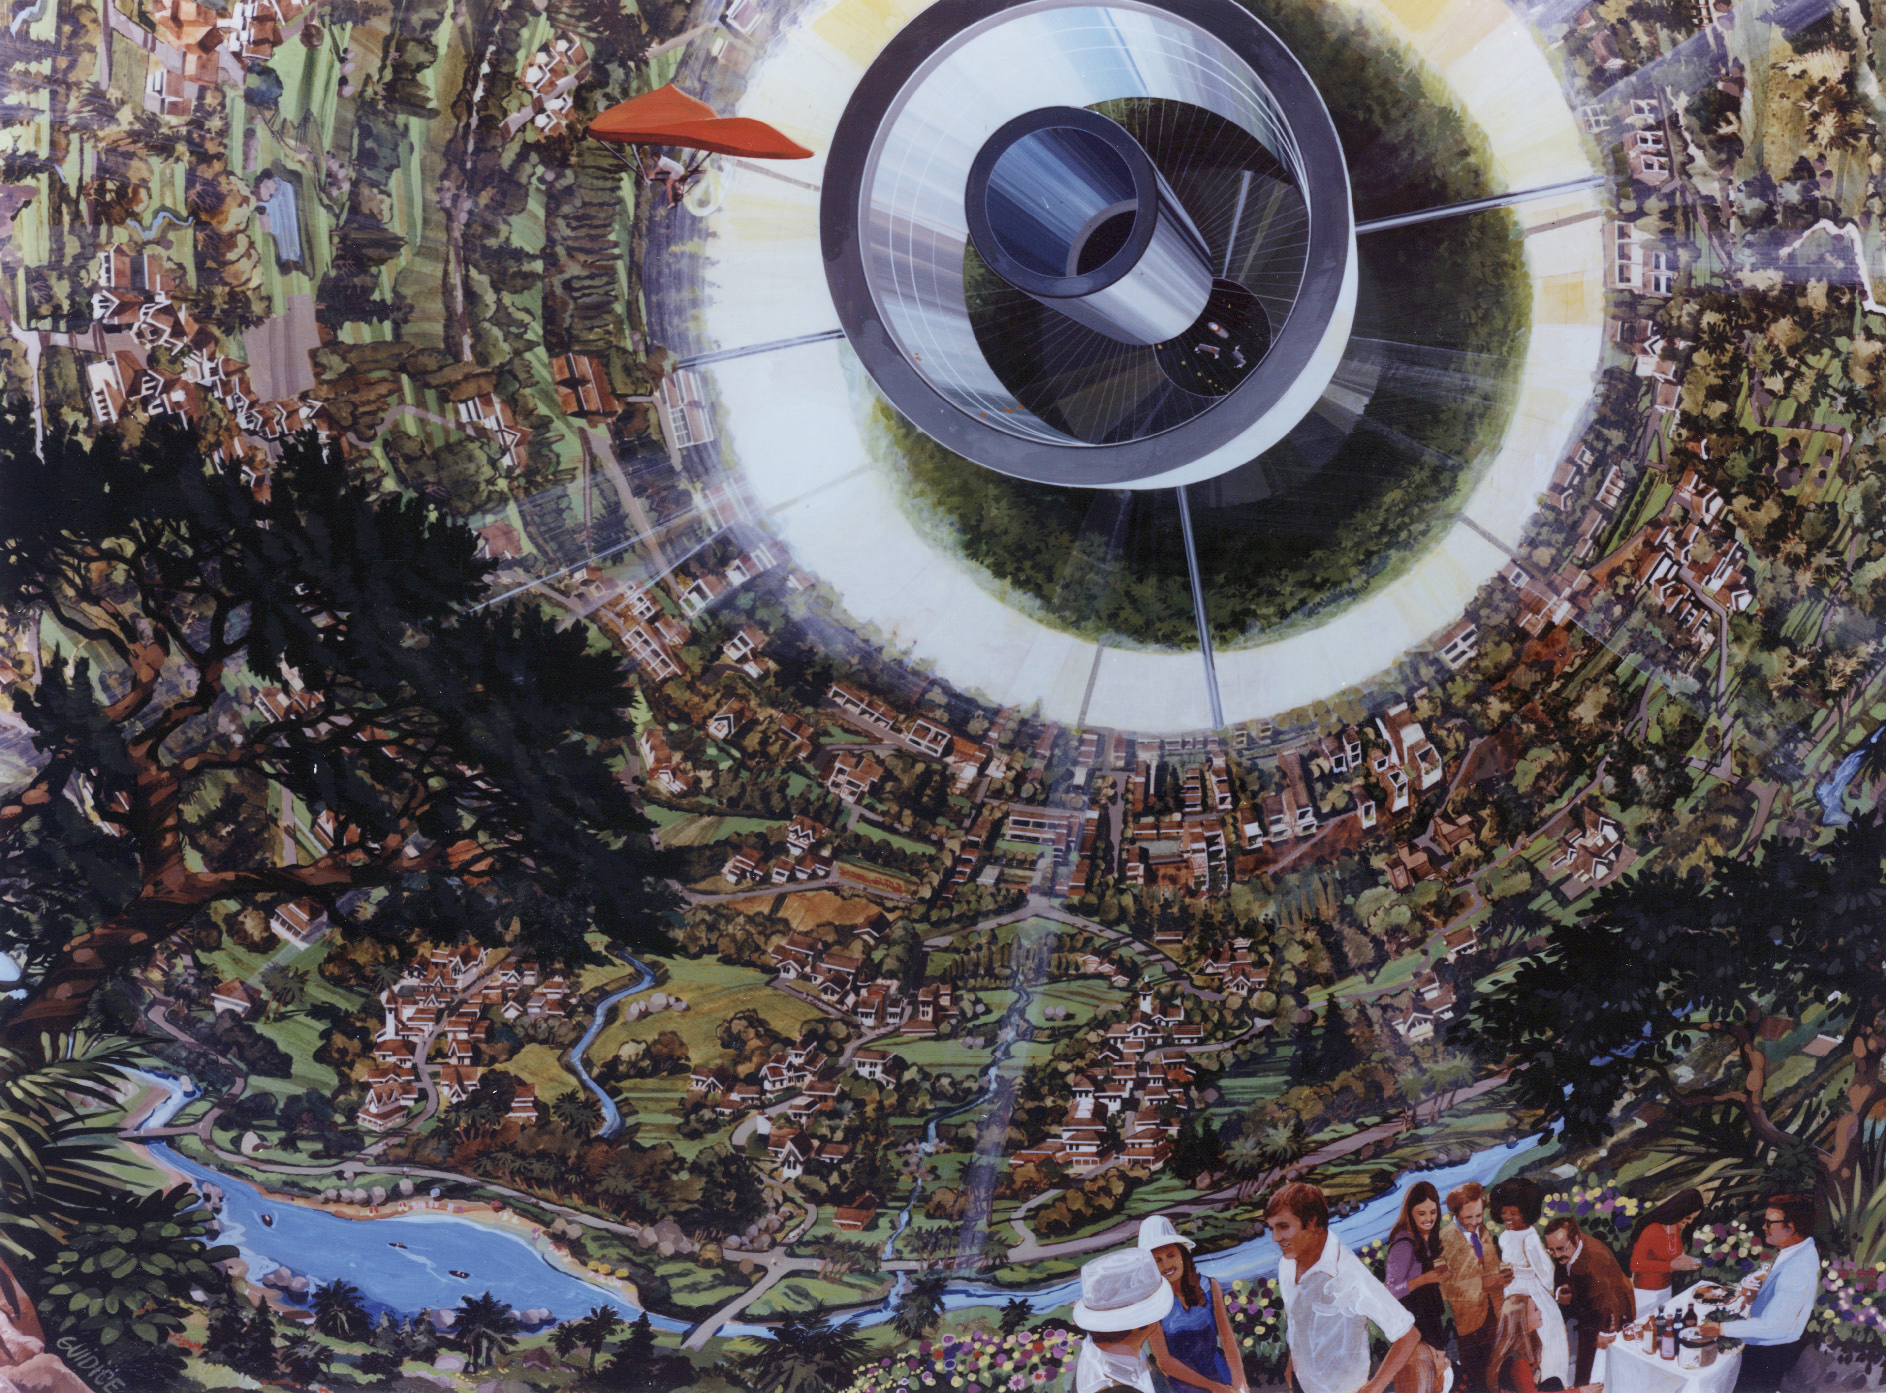 Illustration of a space settlement concept called a Bernal Sphere